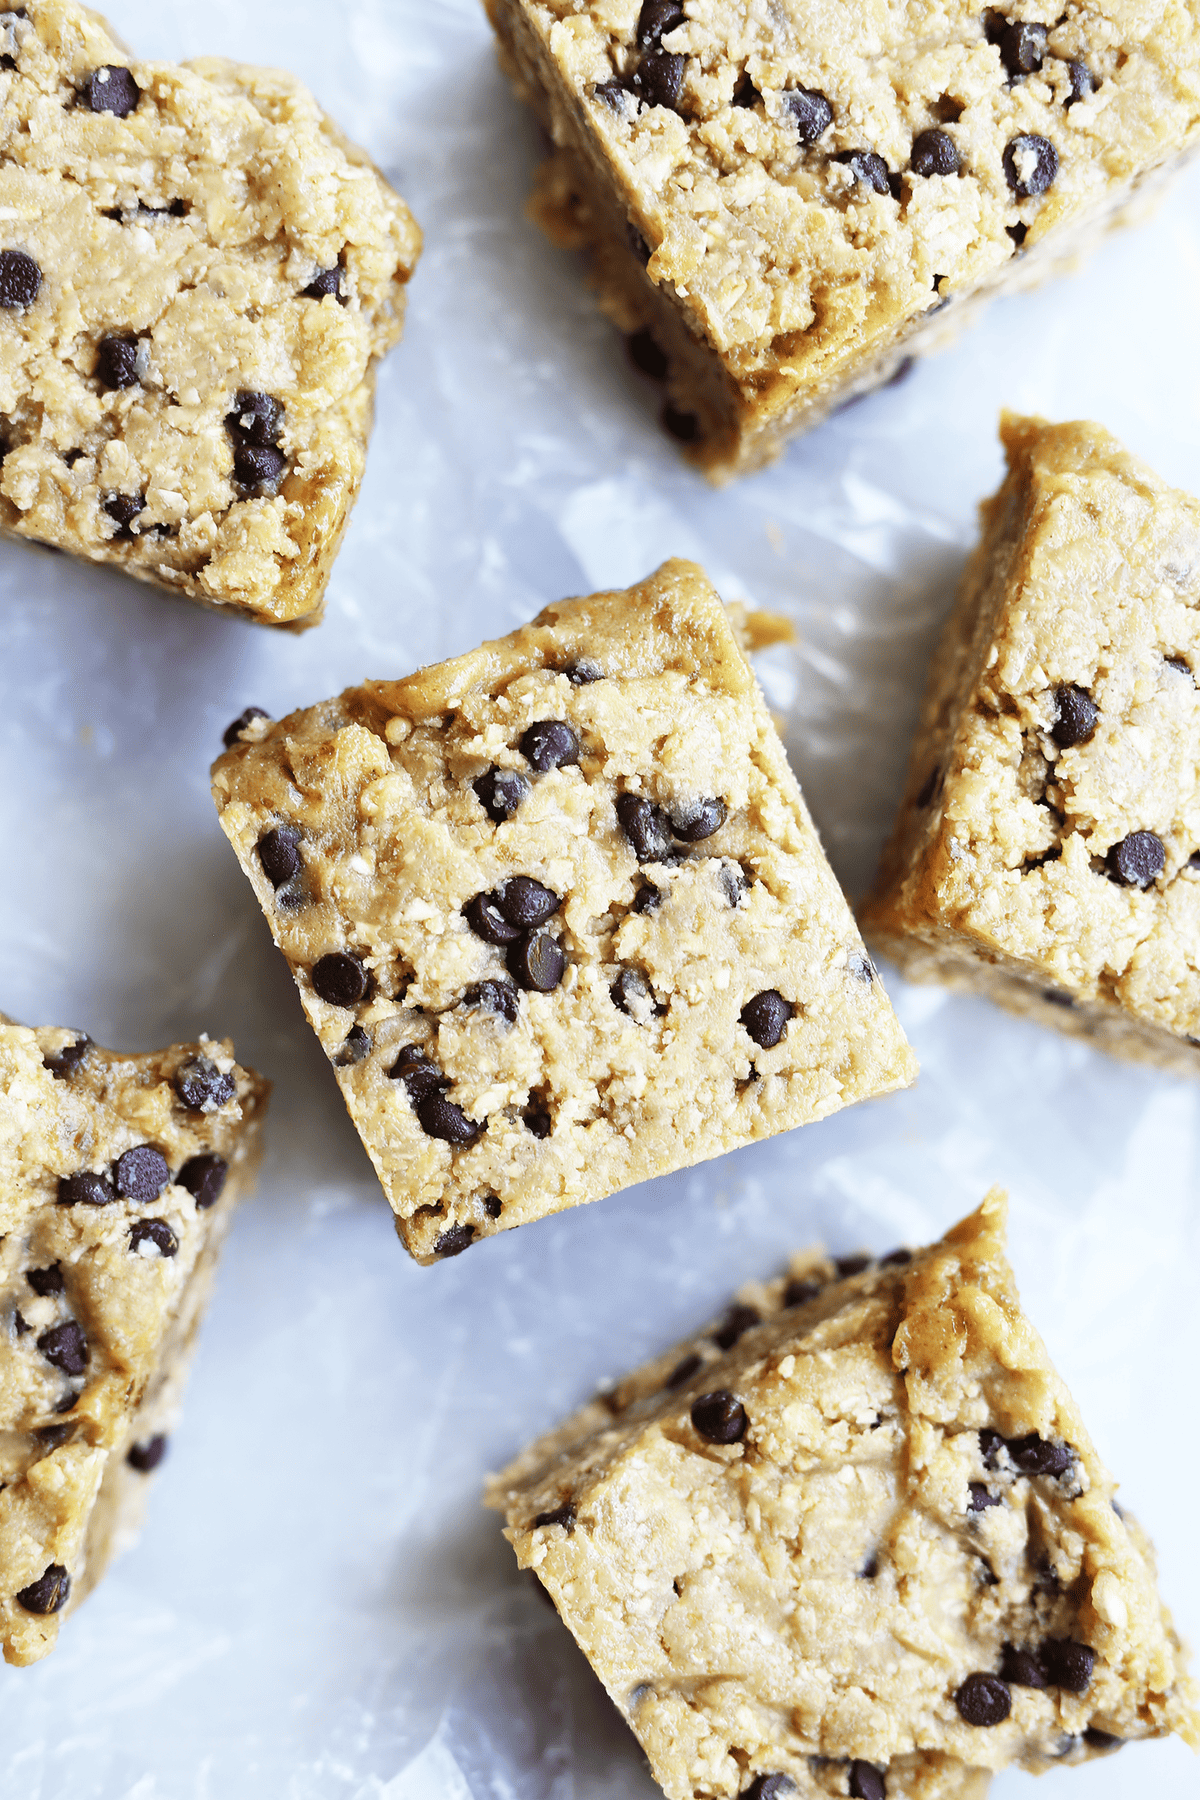 Chocolate Chip Cookie Dough Caramel Bars are super easy, no baking, vegan, gluten free, refined sugar free and super yum! 